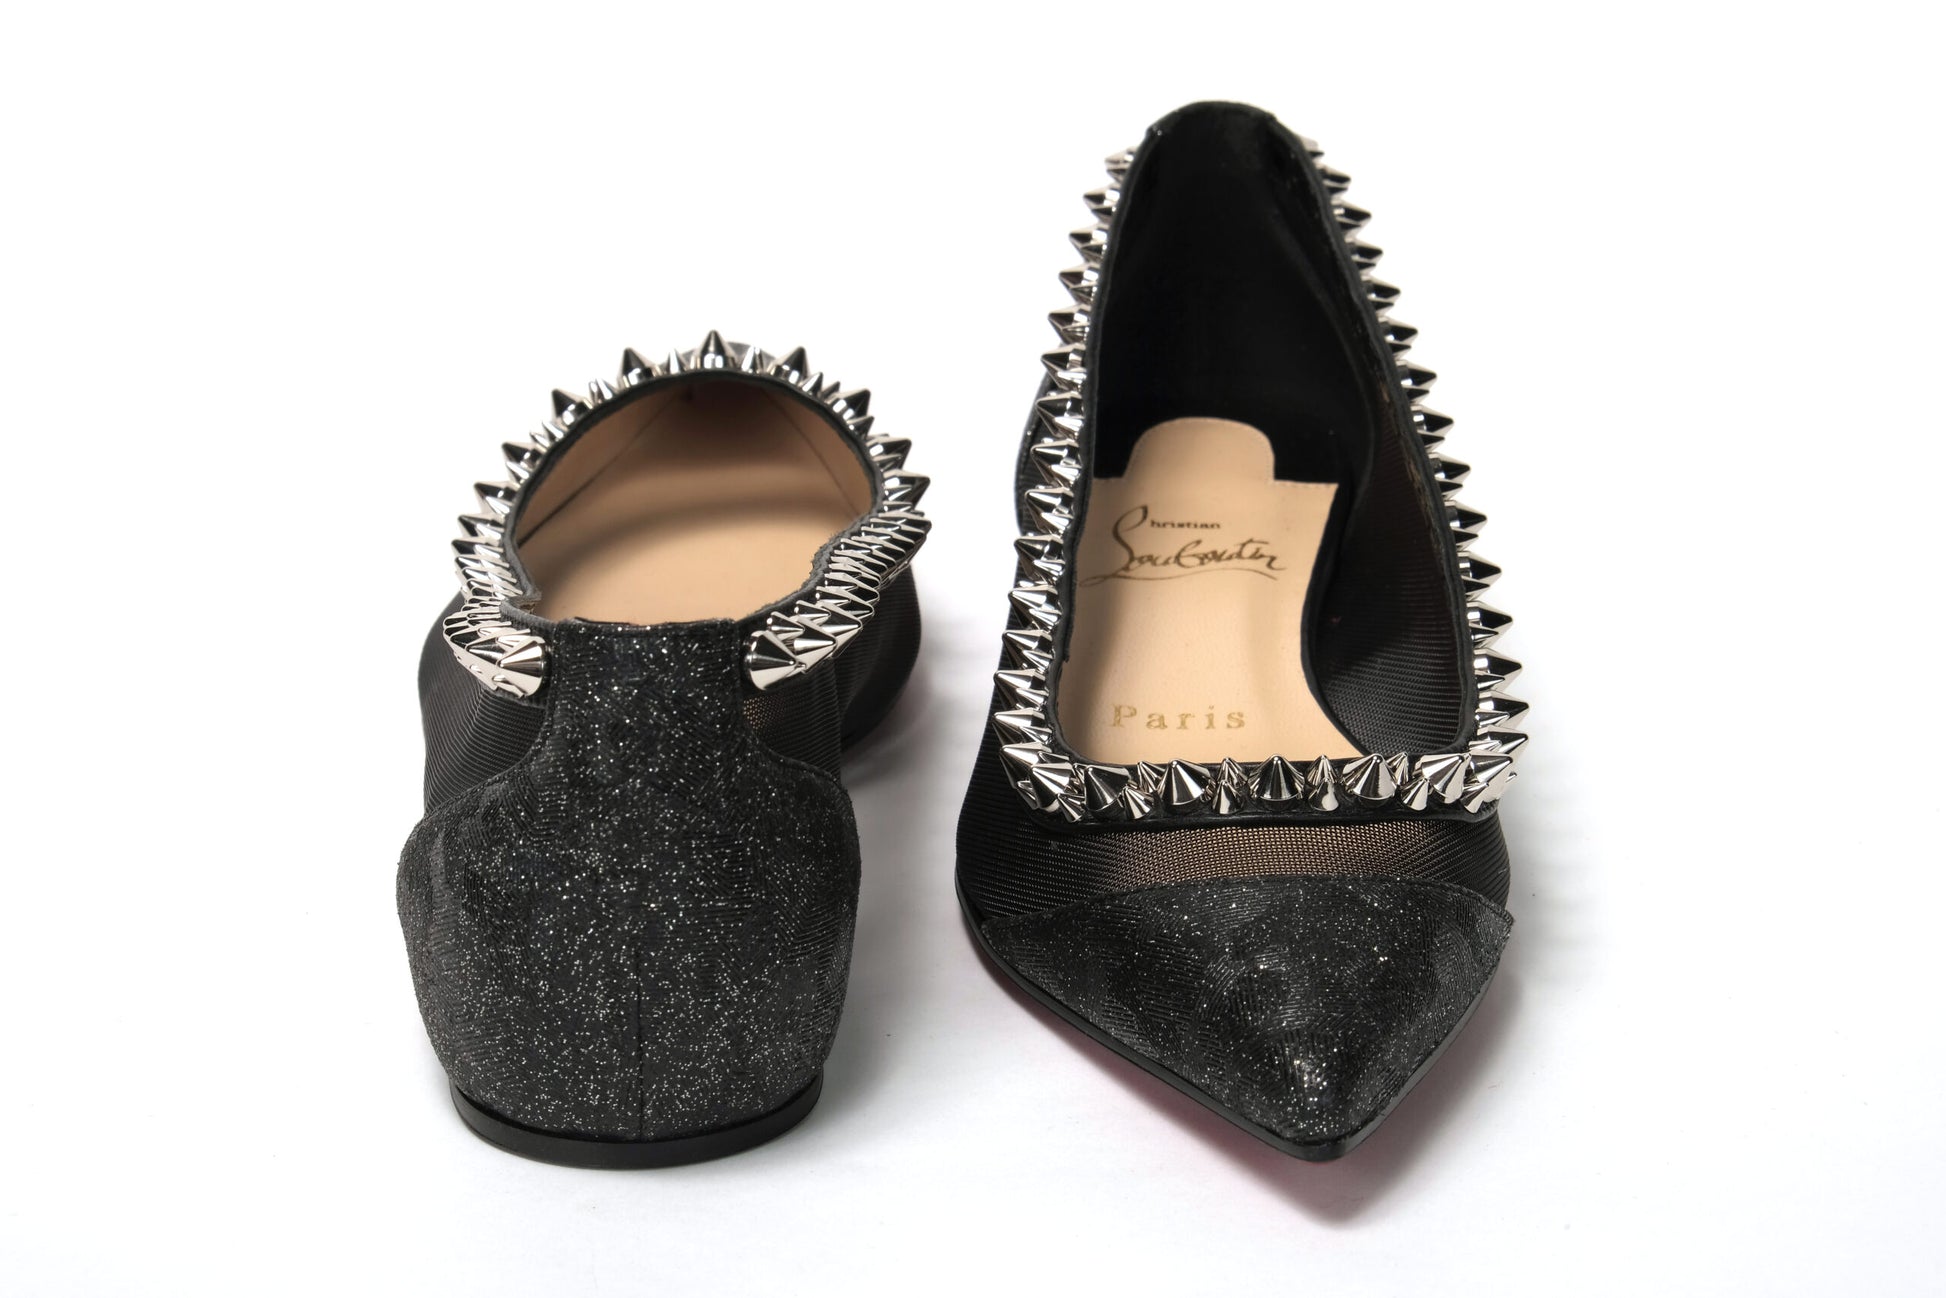 Christian Louboutin Black Silver Flat Point Toe Shoe - Designed by Christian Louboutin Available to Buy at a Discounted Price on Moon Behind The Hill Online Designer Discount Store